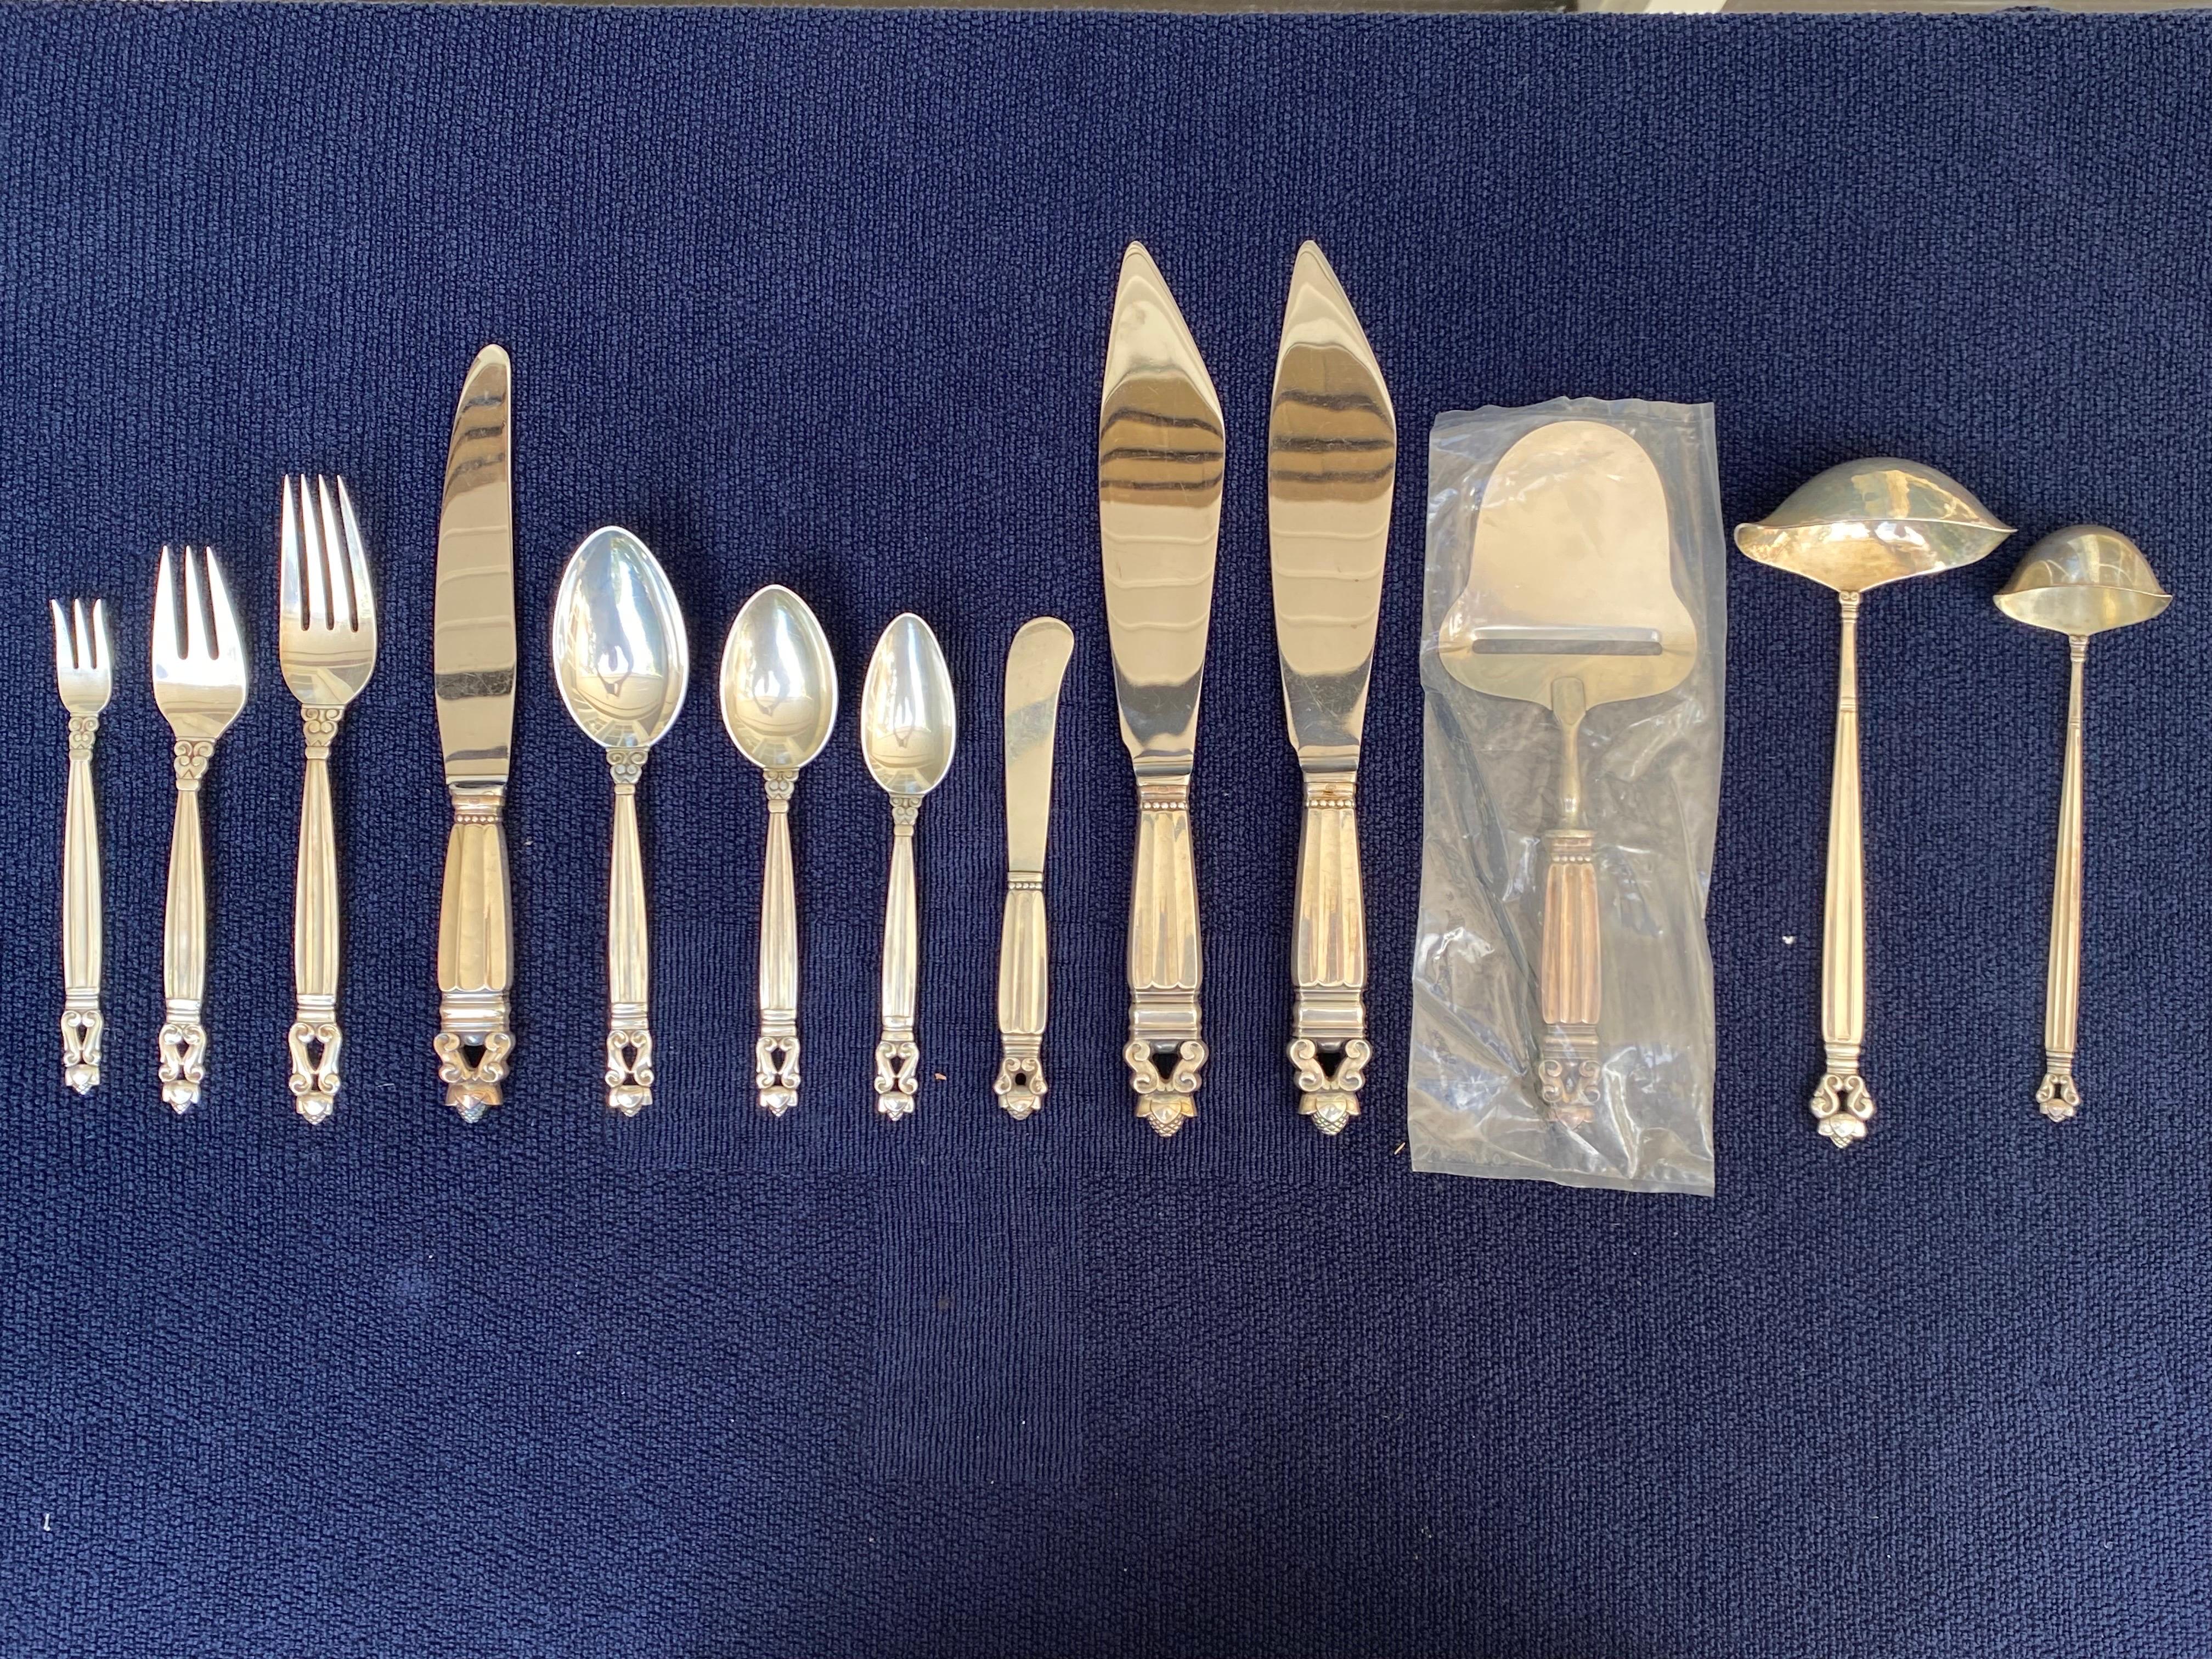 Georg Jensen Acorn Pattern Sterling Silver Flatware, 10-12 Service, 94 Pieces (set not complete). Made by Georg Jensen in Copenhagen. Designed by Johan Rohde. 
Dinner knives, Cake Knives and Cheese plane have stainless steel blades. Butter knives